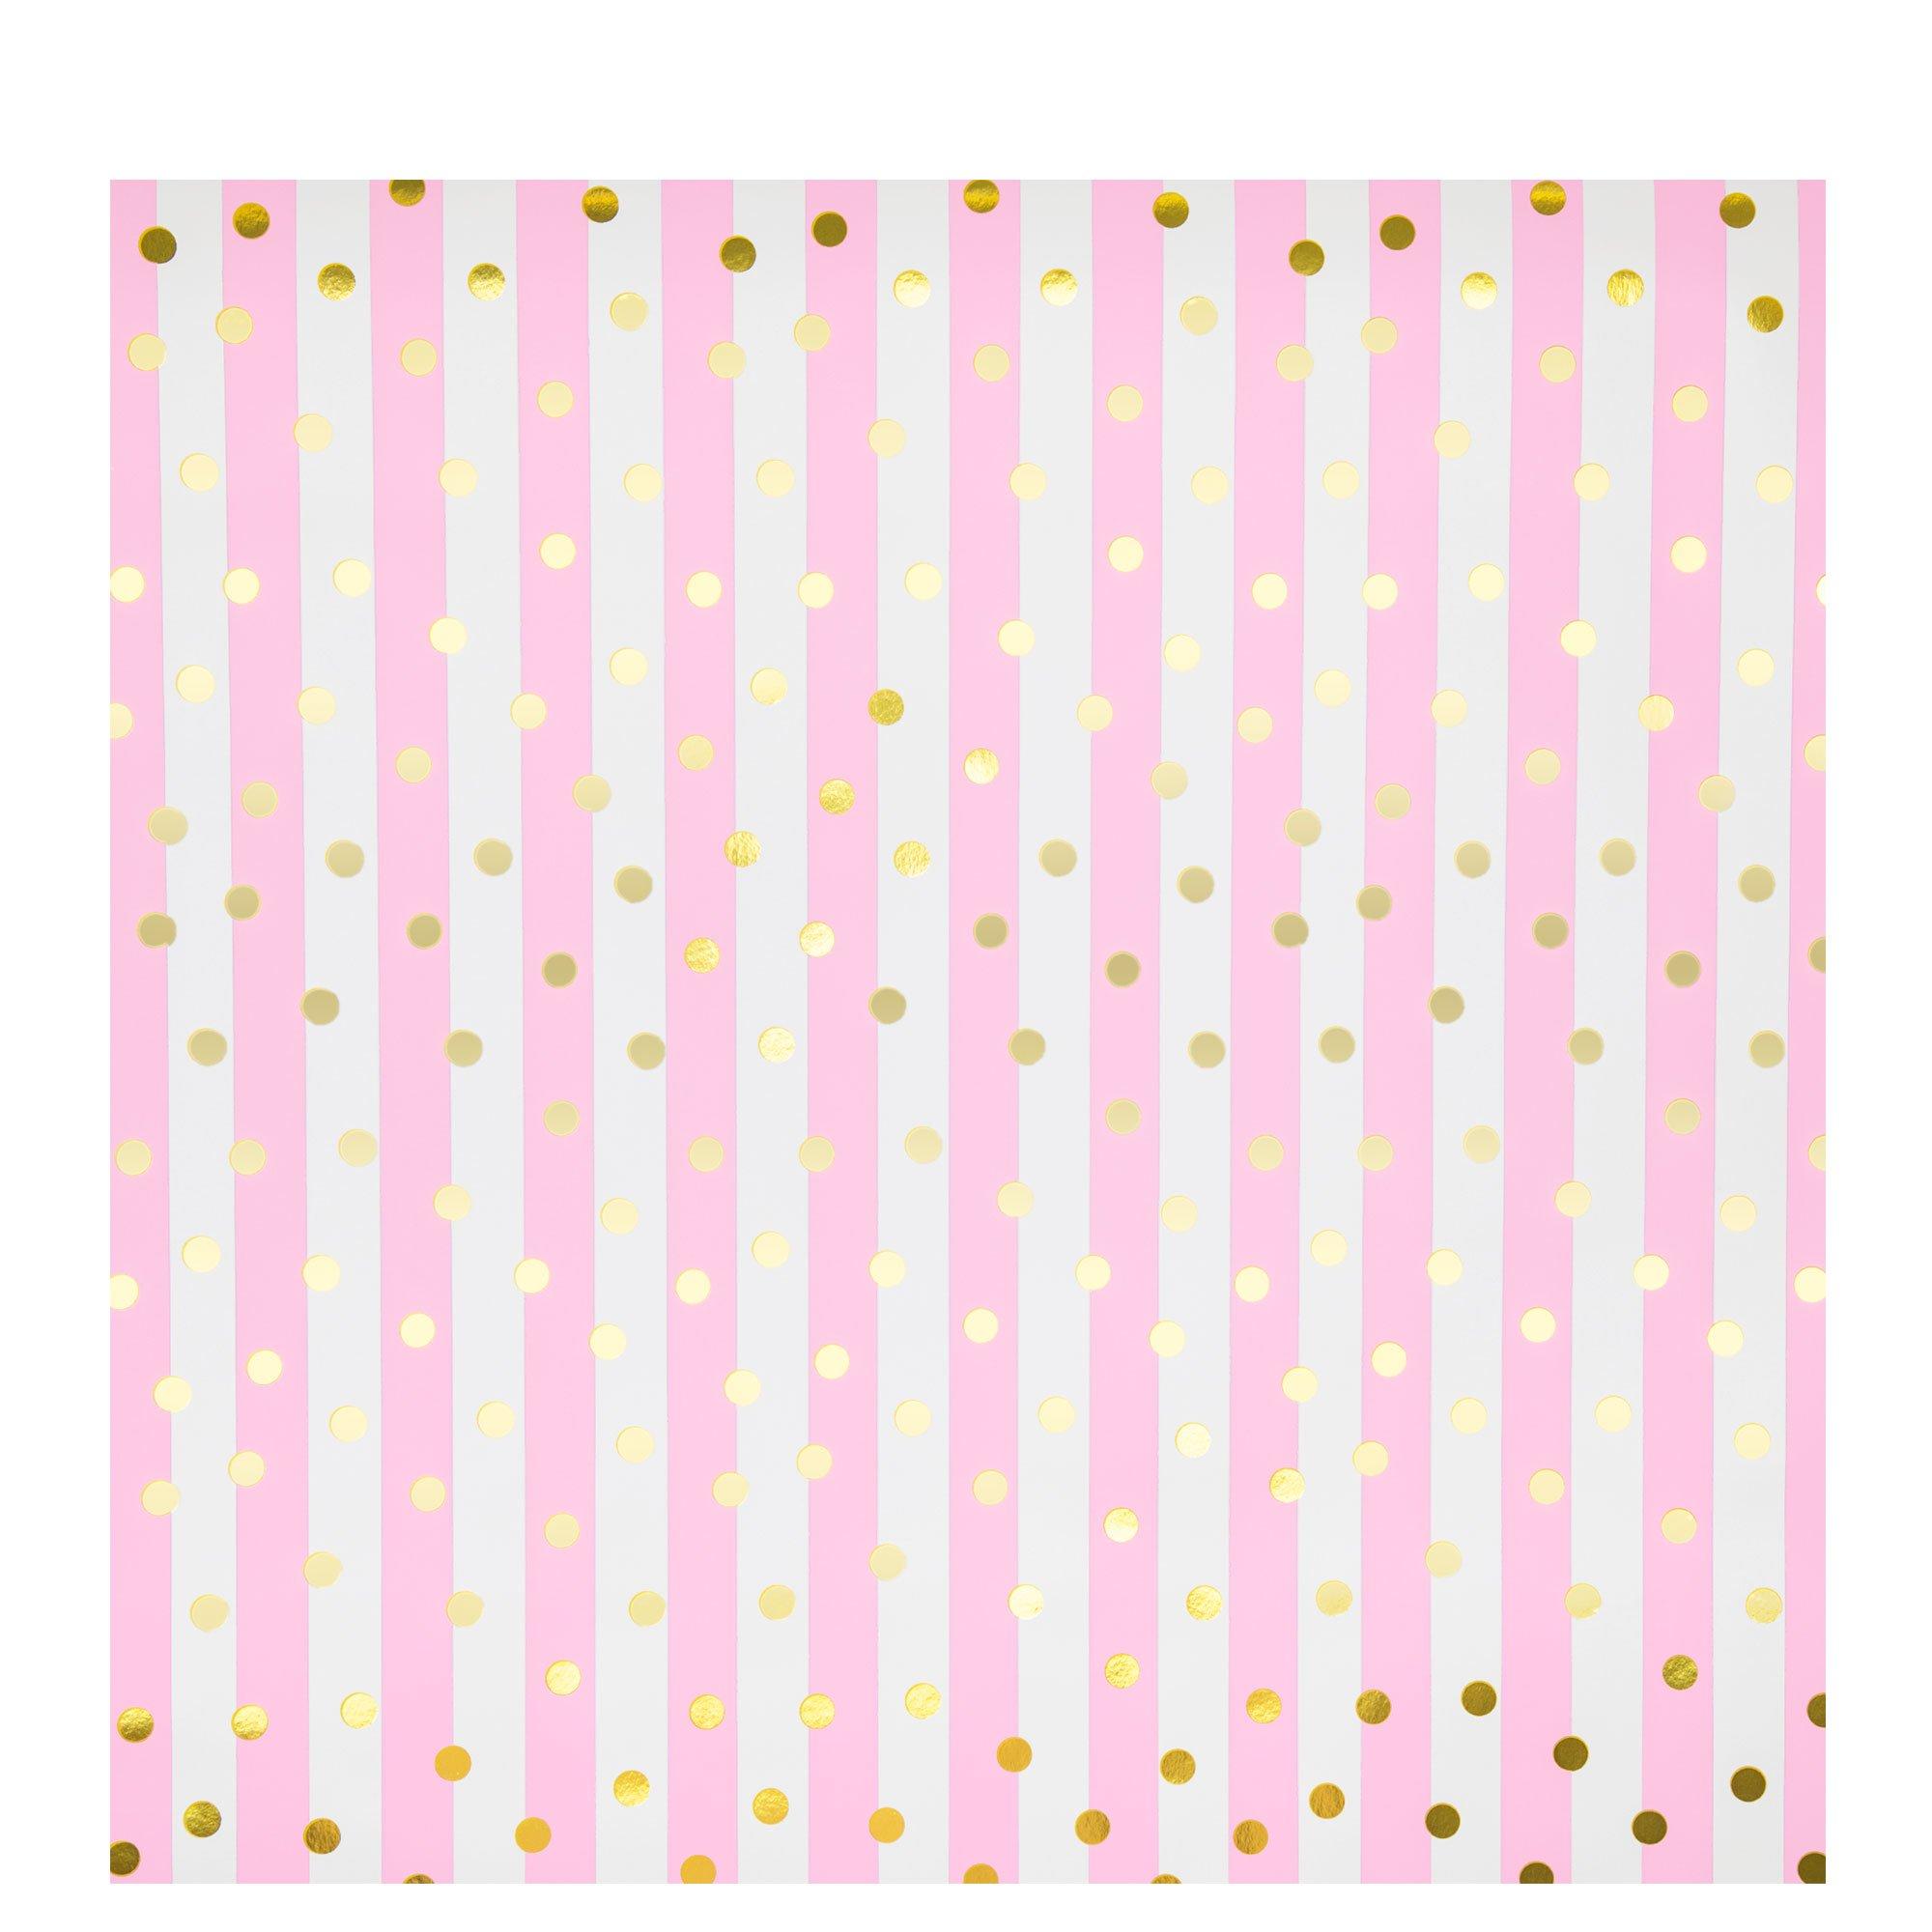 Wrapping Paper: Gold Polka Dot gift Wrap, Birthday, Holiday